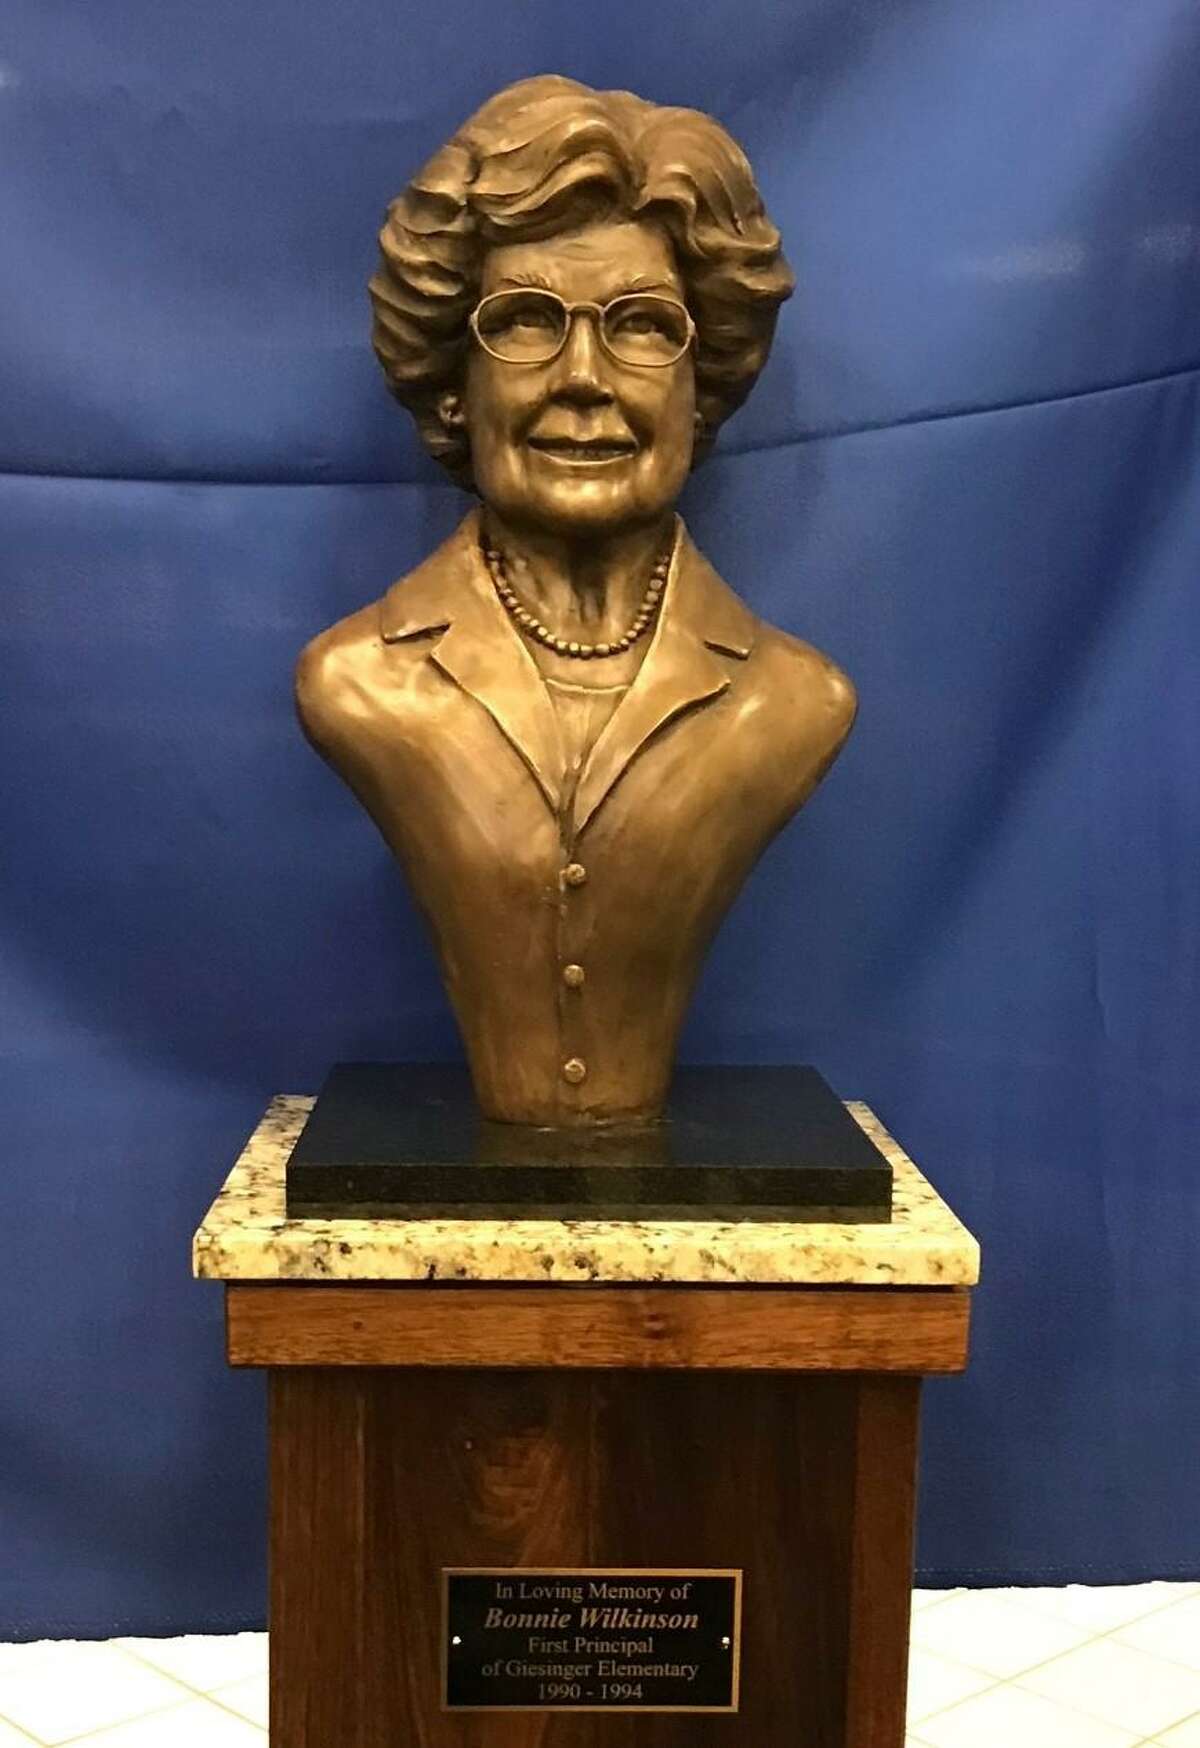 On Sunday, former teachers, friends and family members came together to dedicate a memorial statue of beloved Conroe educator Bonnie Wilkinson.